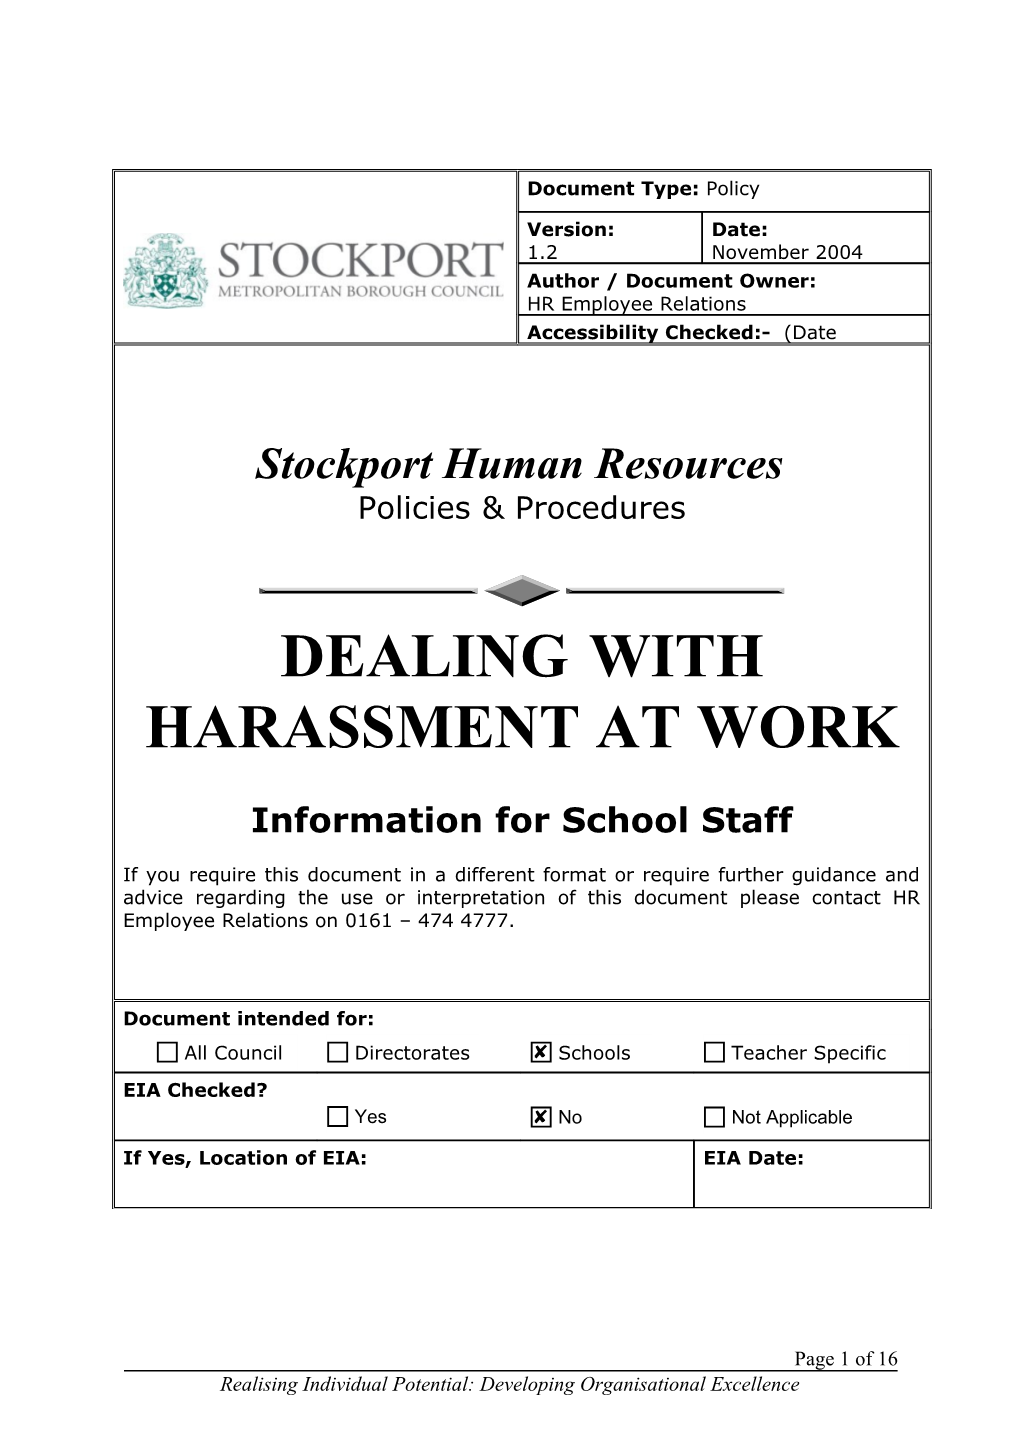 Dealing with Harassment at Work